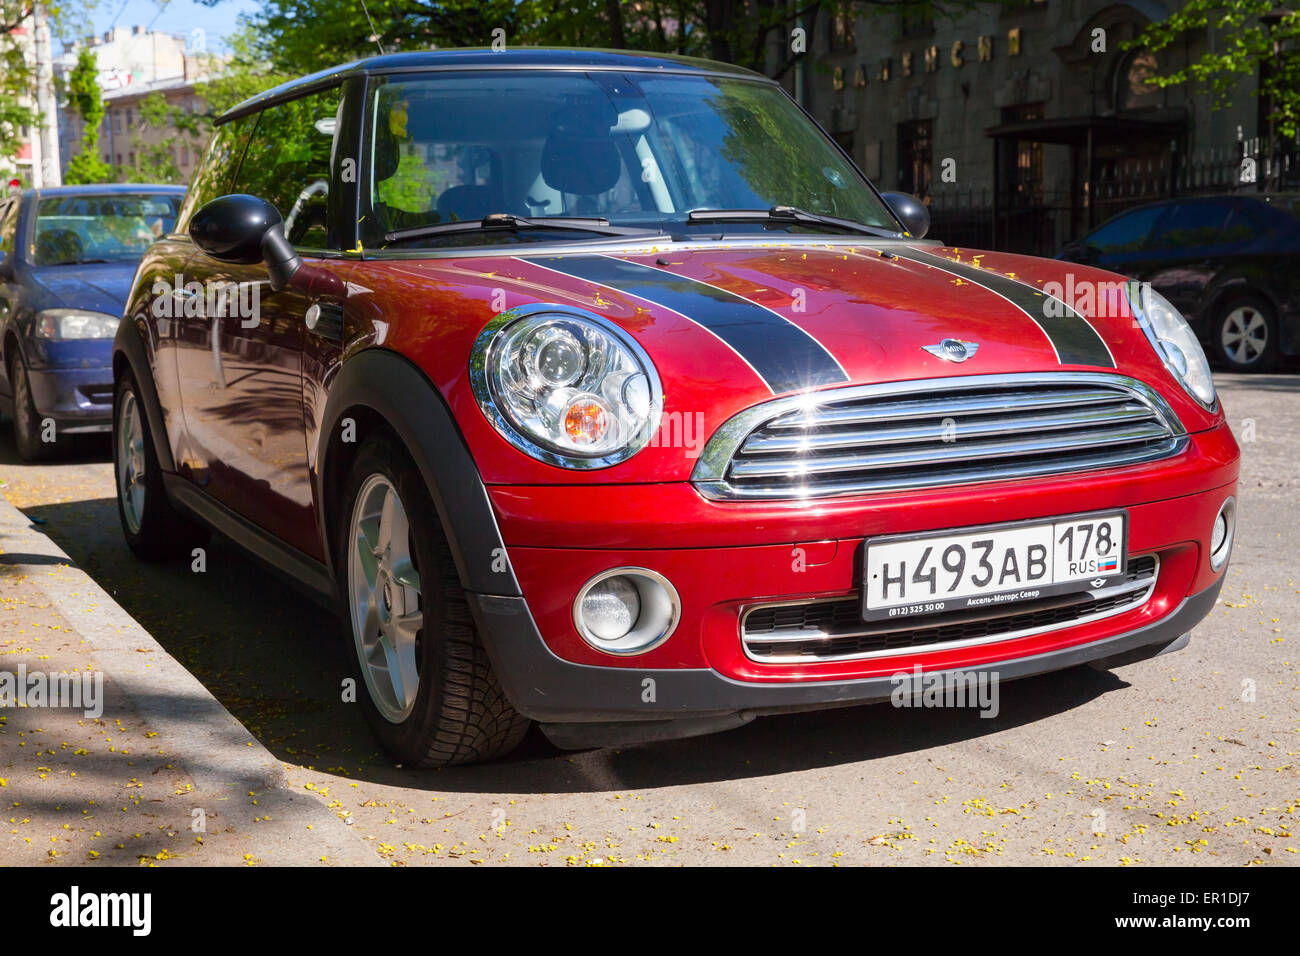 Saint-Petersburg, Russia - May 32, 2015: shining red metallic mini cooper car with black stripes stands on road side in the city Stock Photo